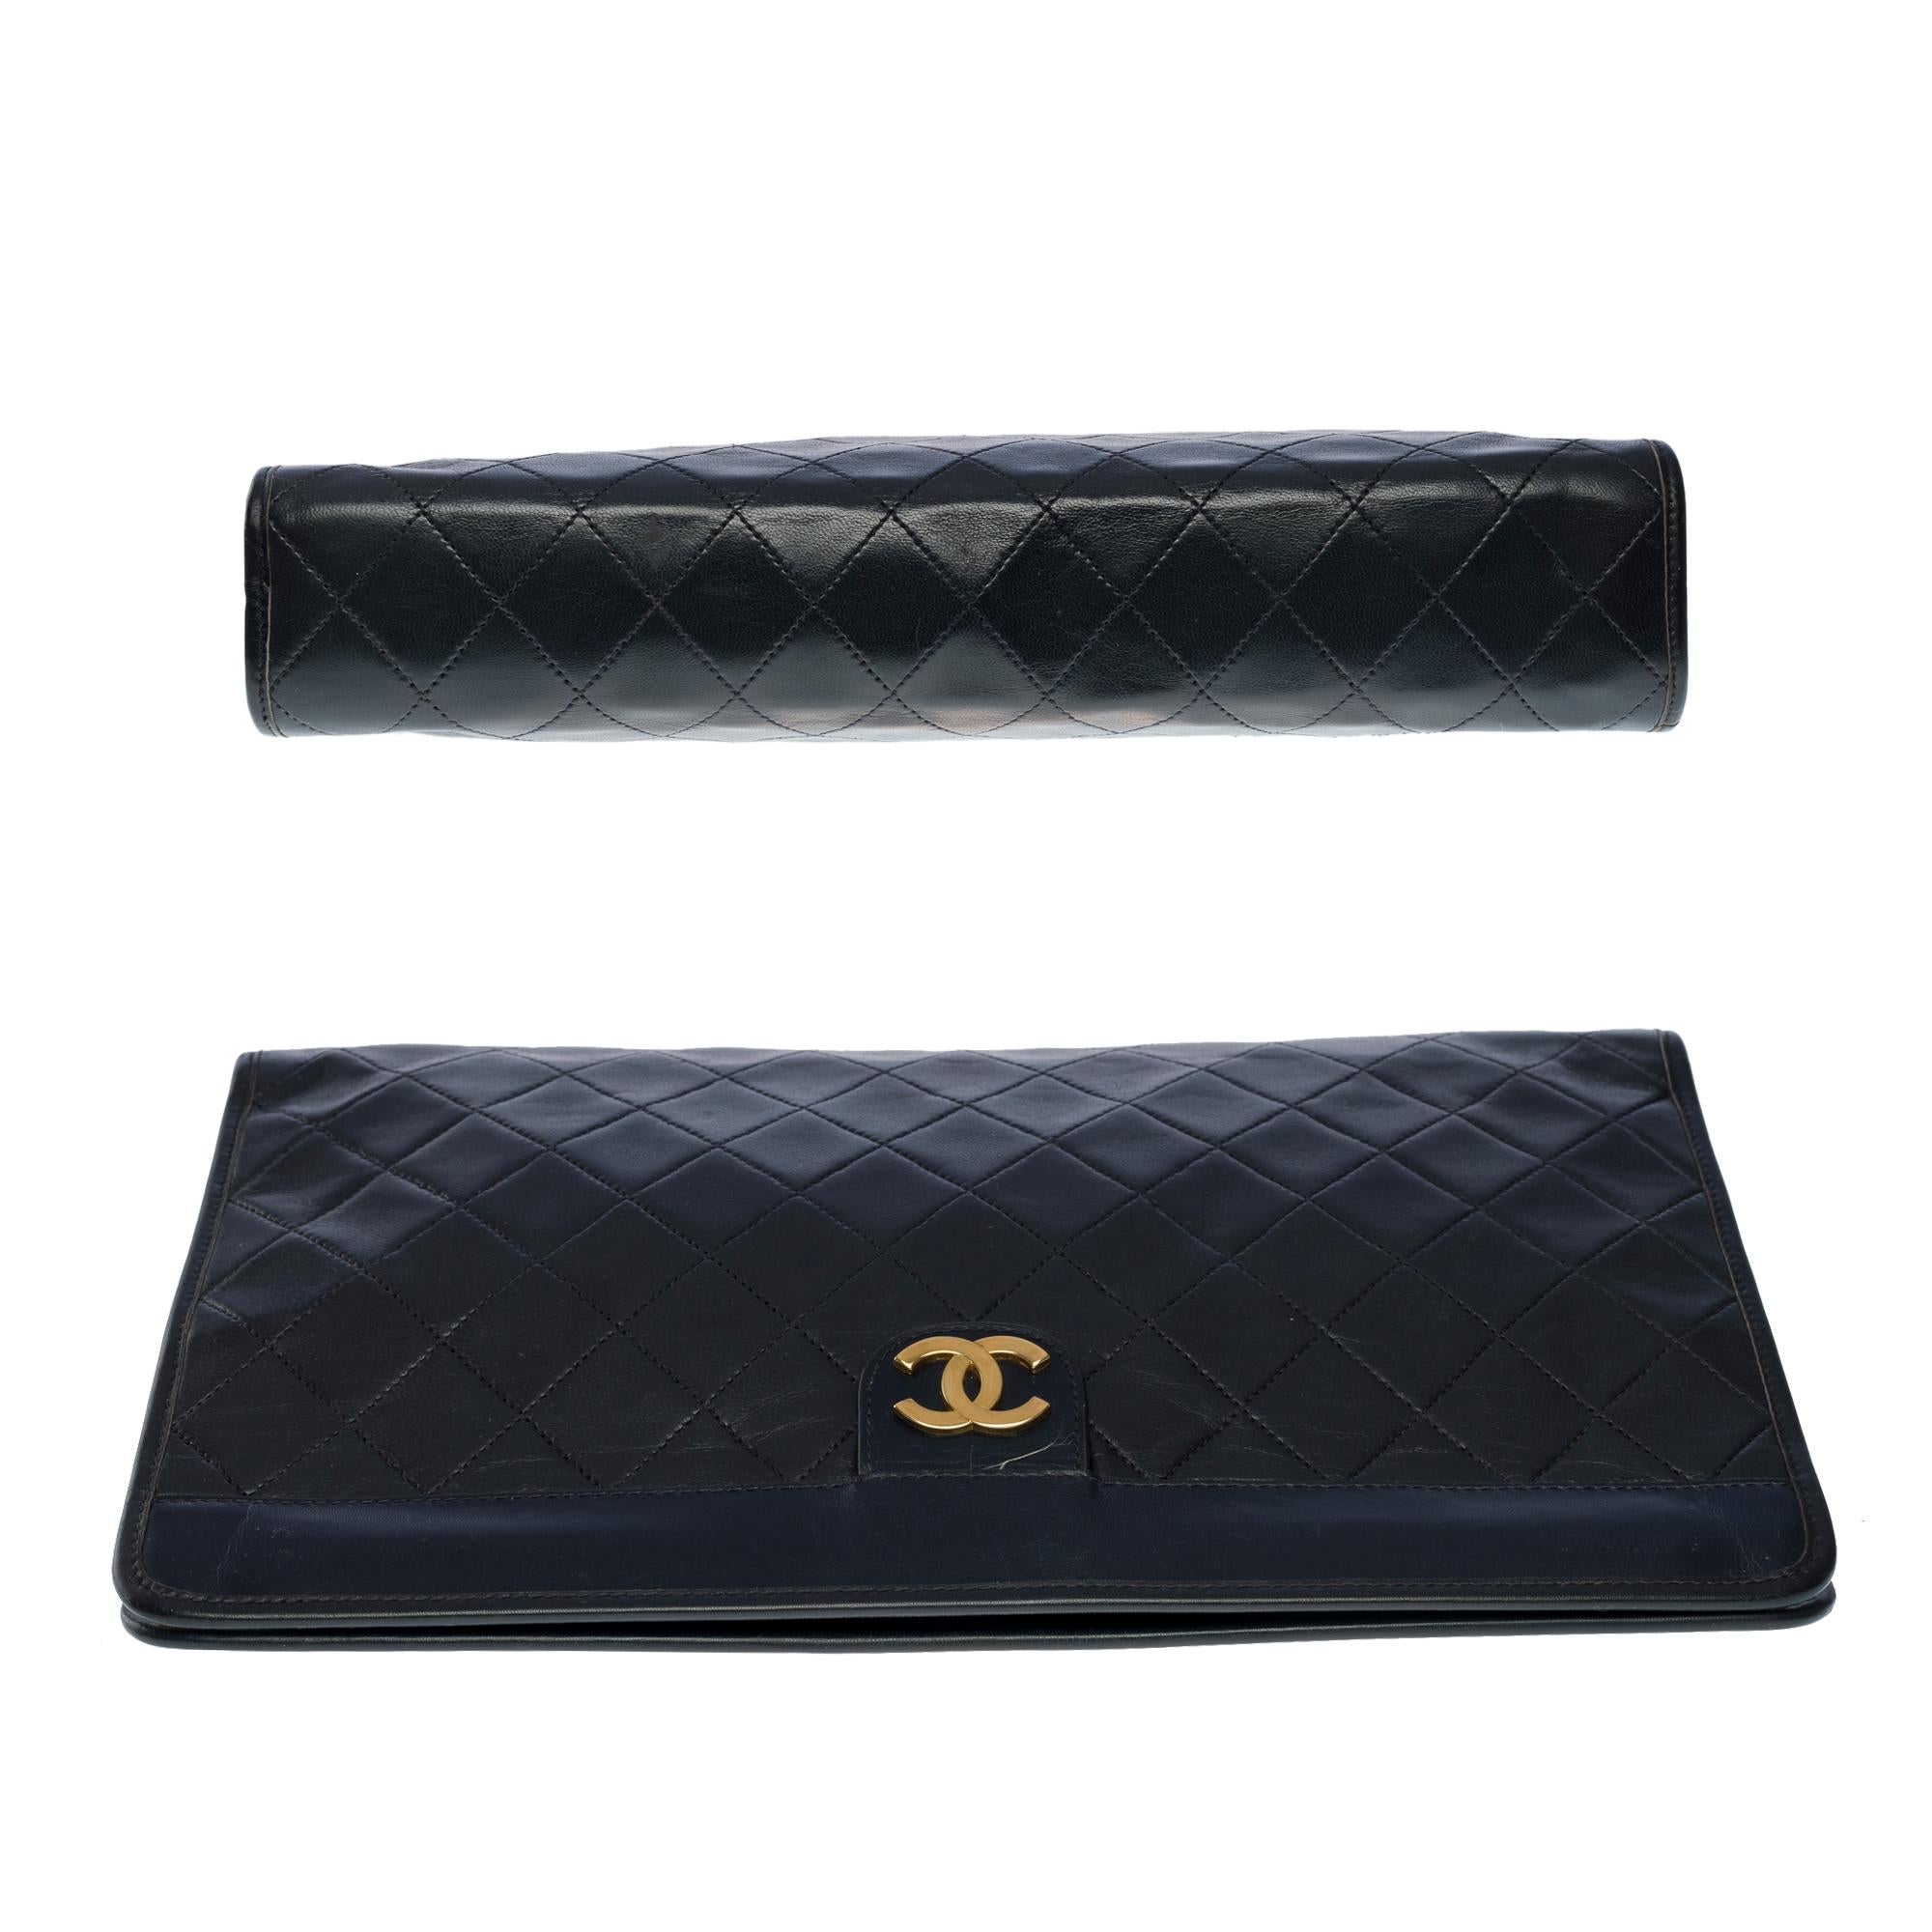 Amazing Chanel Classic Clutch in black quilted lambskin leather, GHW 3